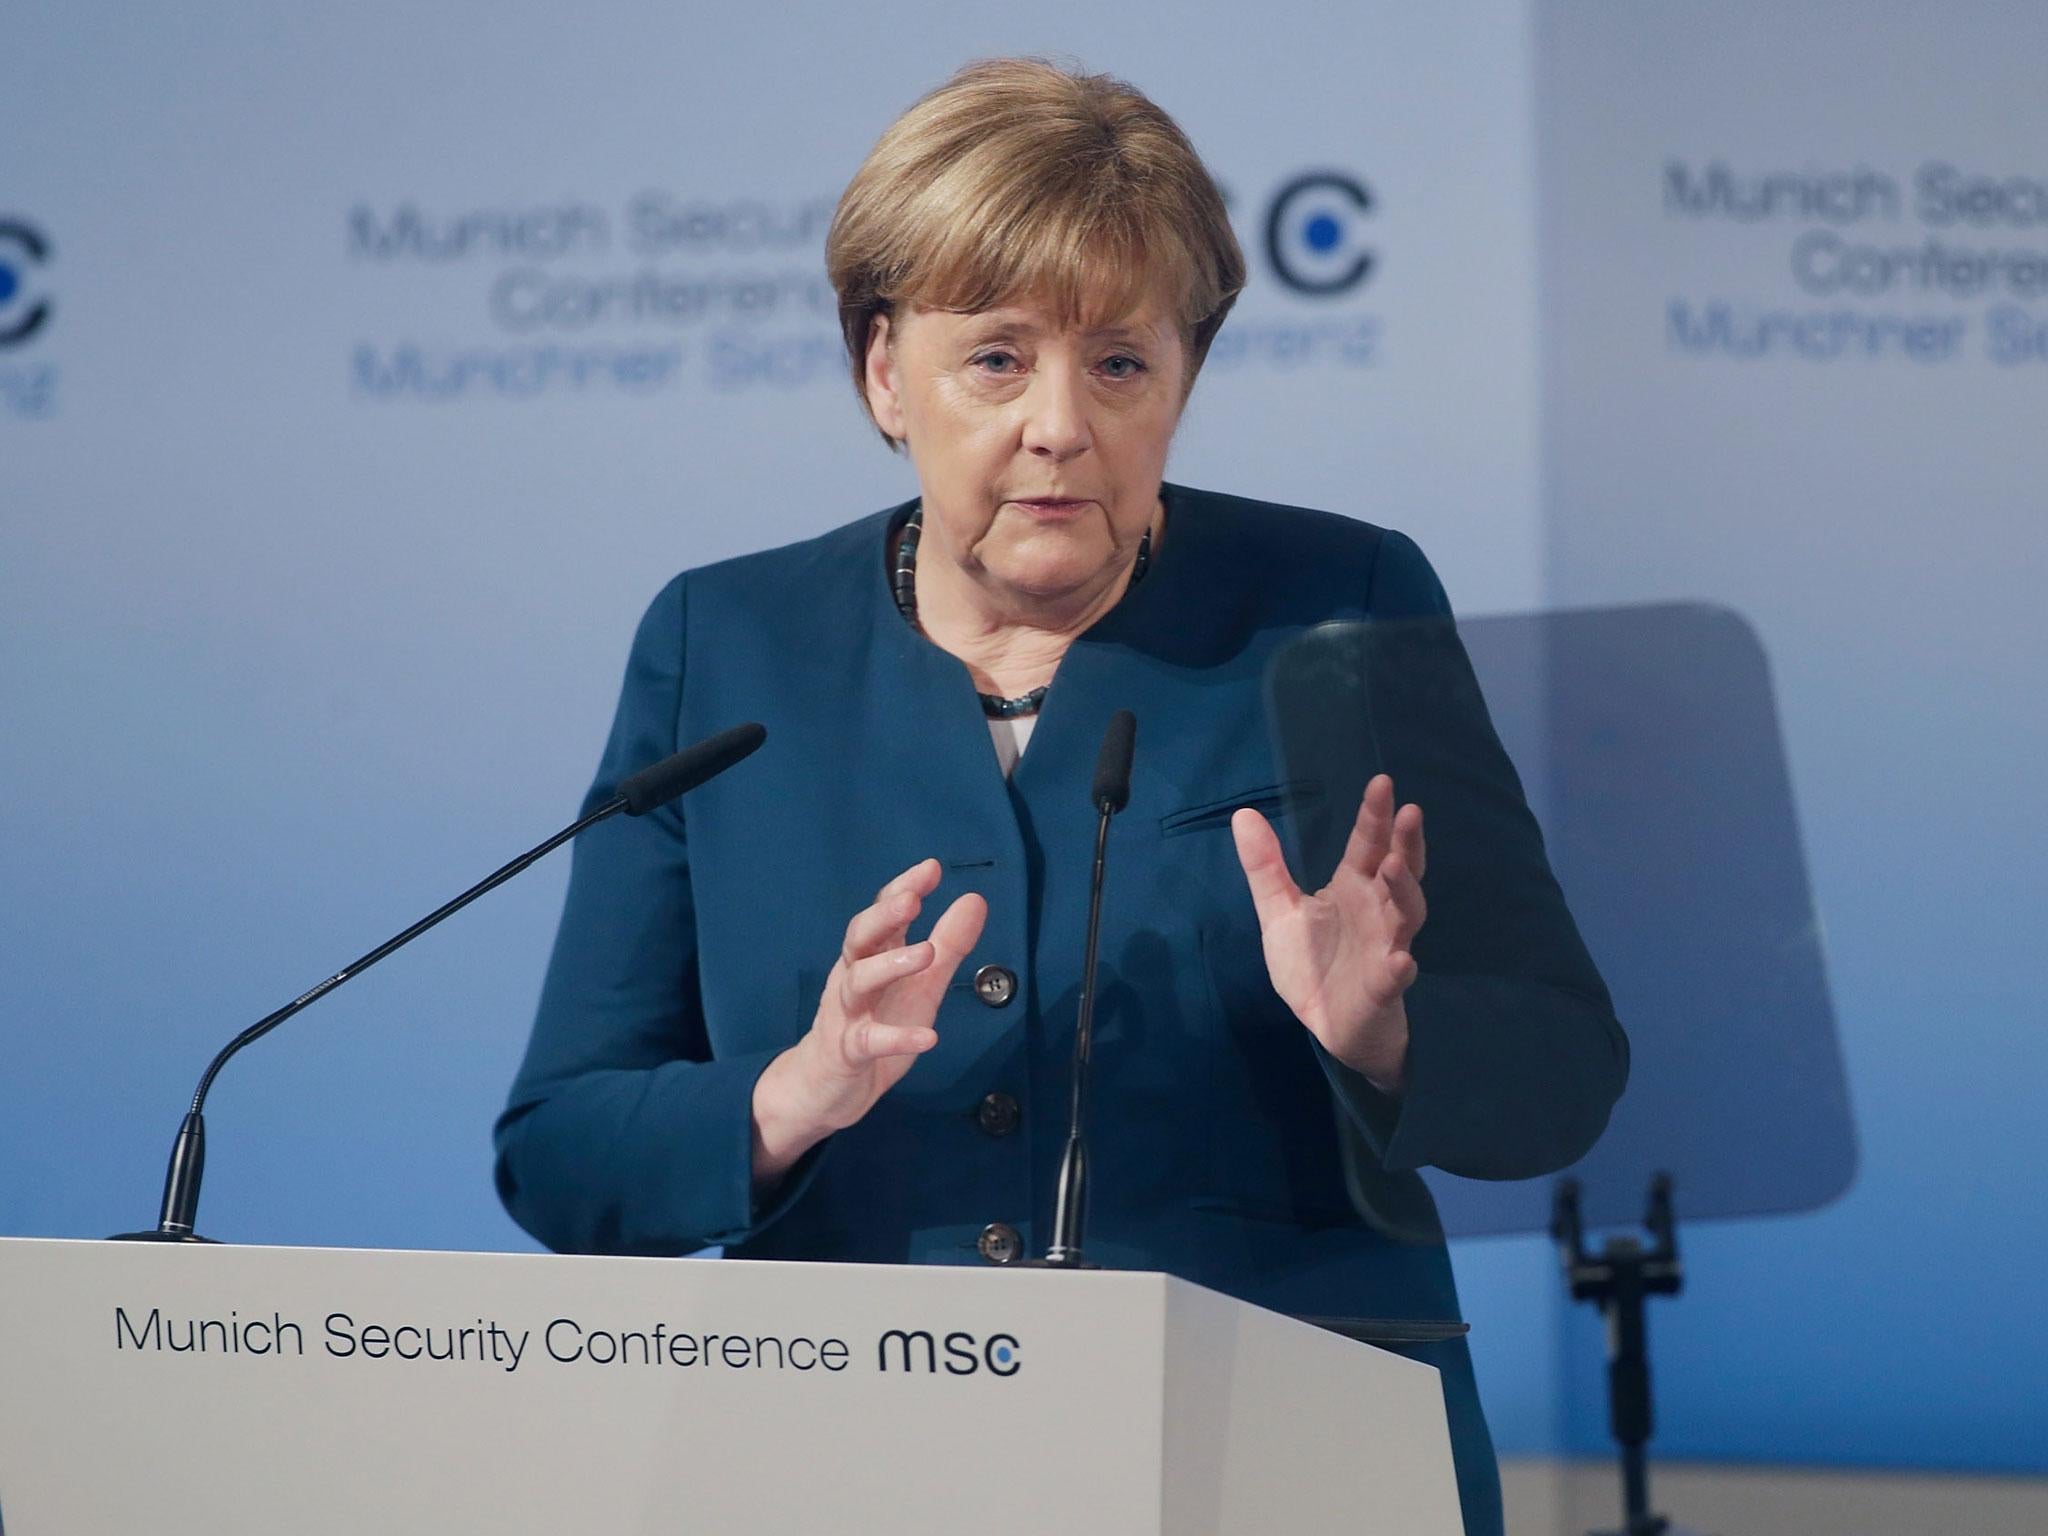 Angela Merkel also called on Europe and its allies to cooperate with Russia in the fight against Isis